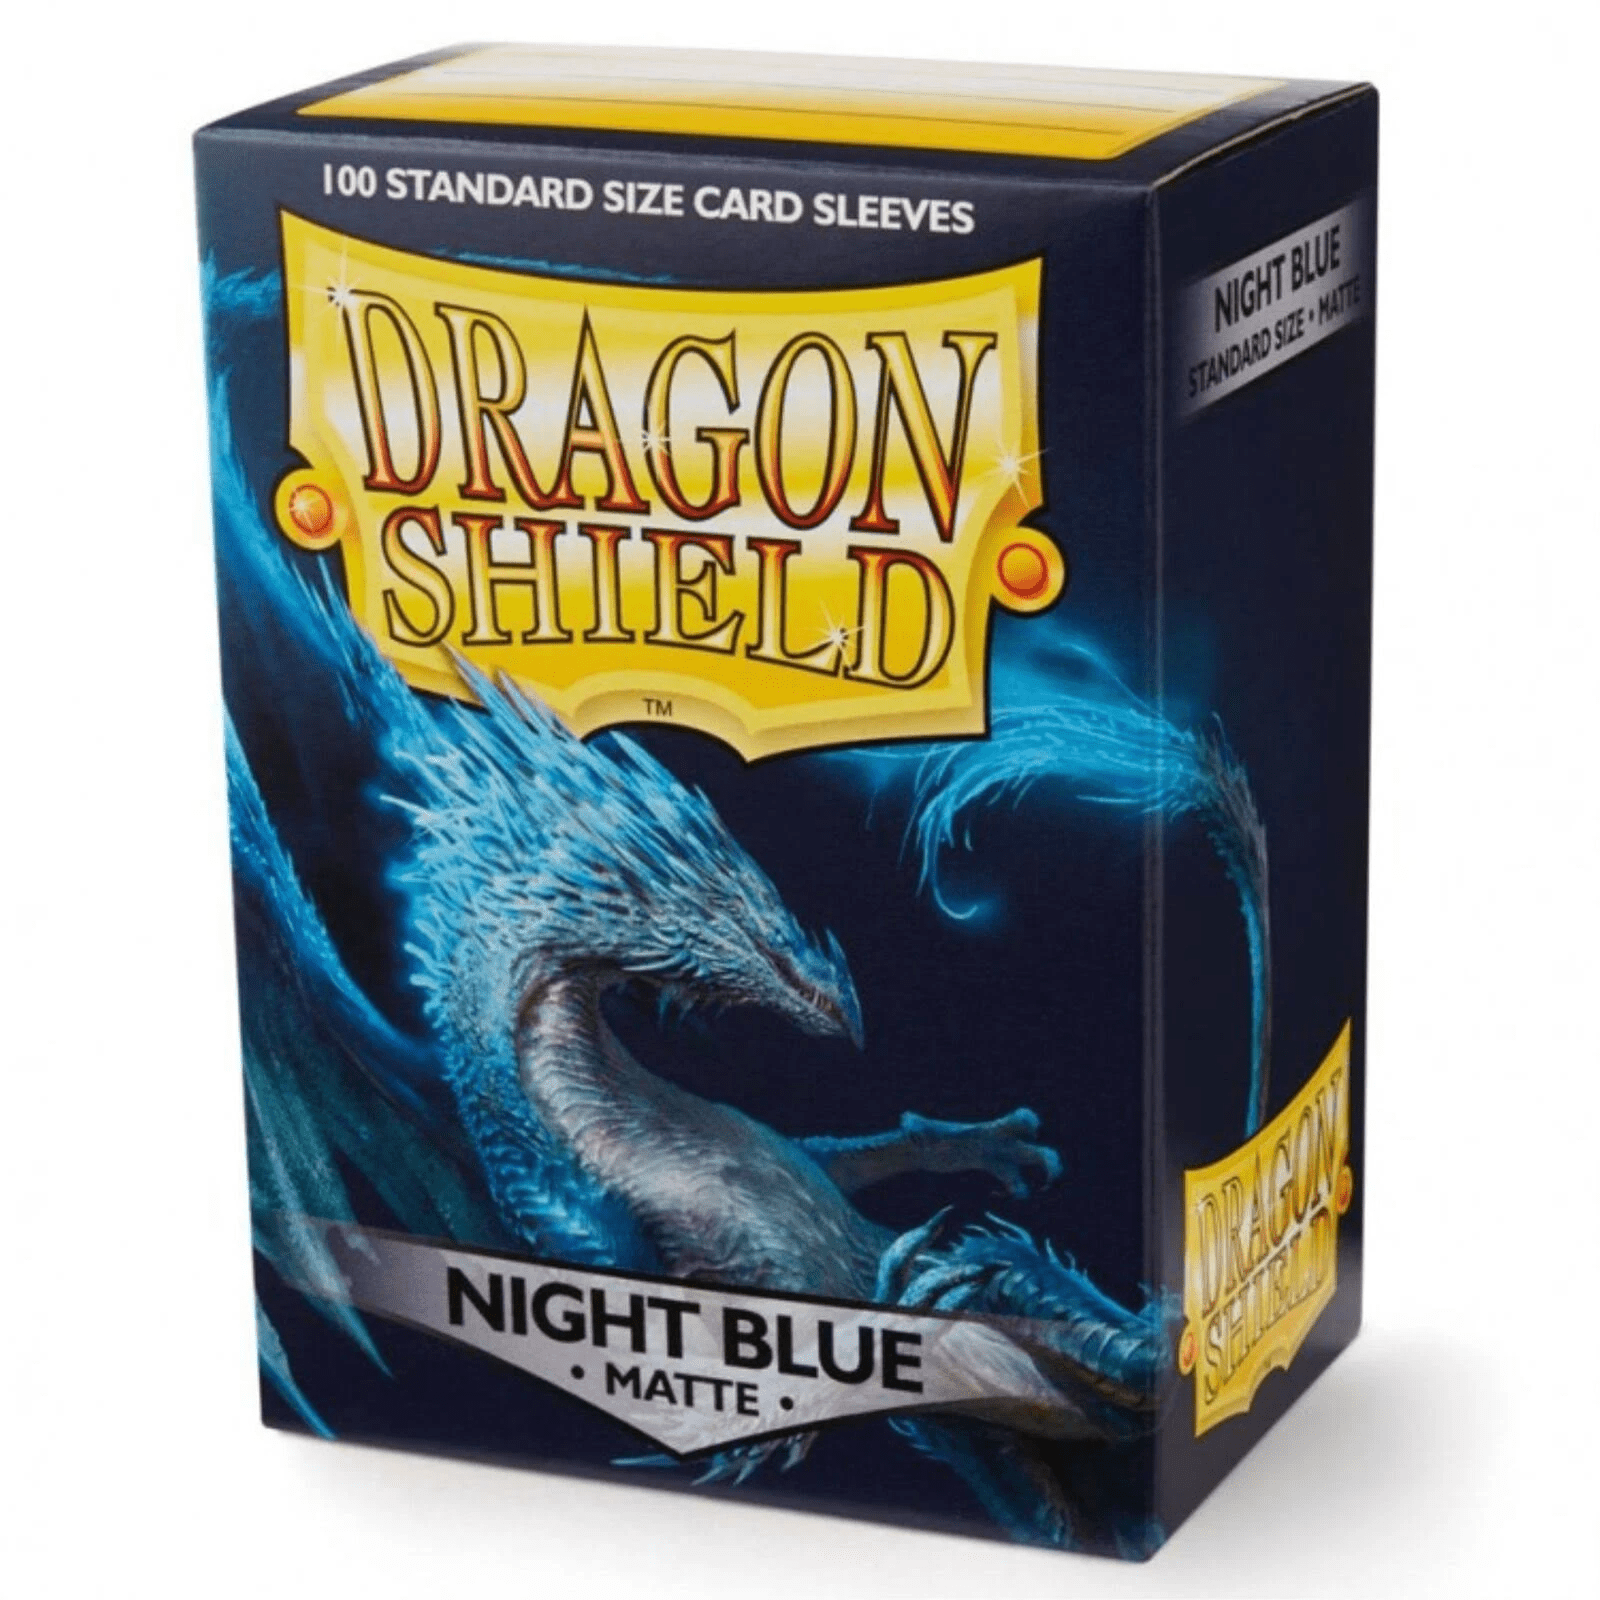 Dragon Shield 100 Count Sleeves Standard Matte Night Blue - Gamescape